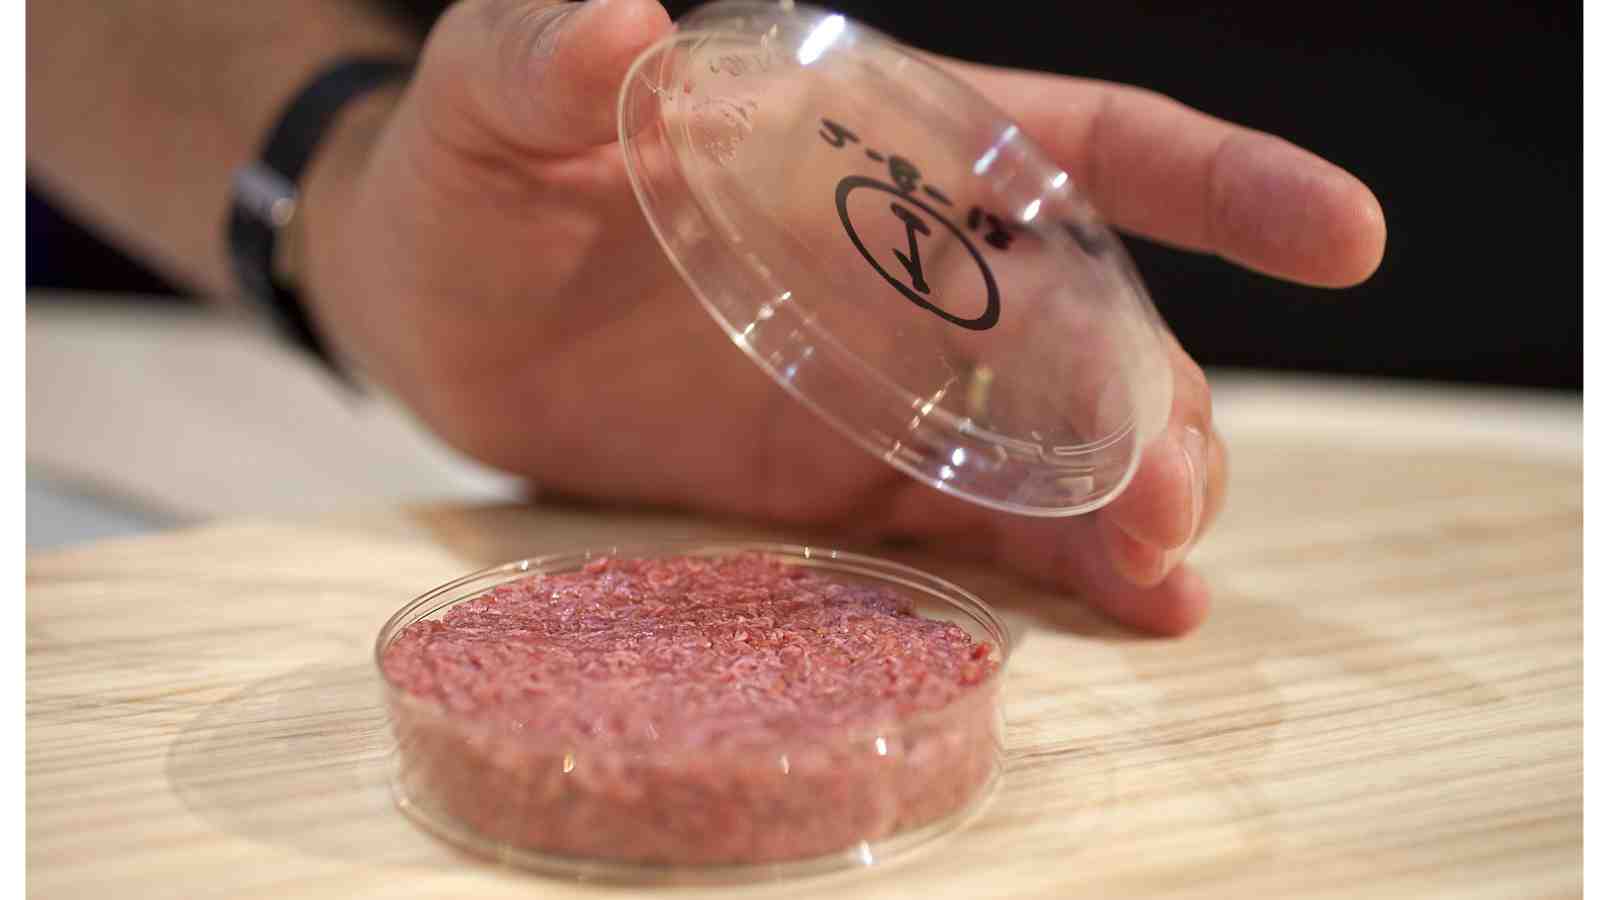 Steak grown from stem cells in the laboratory